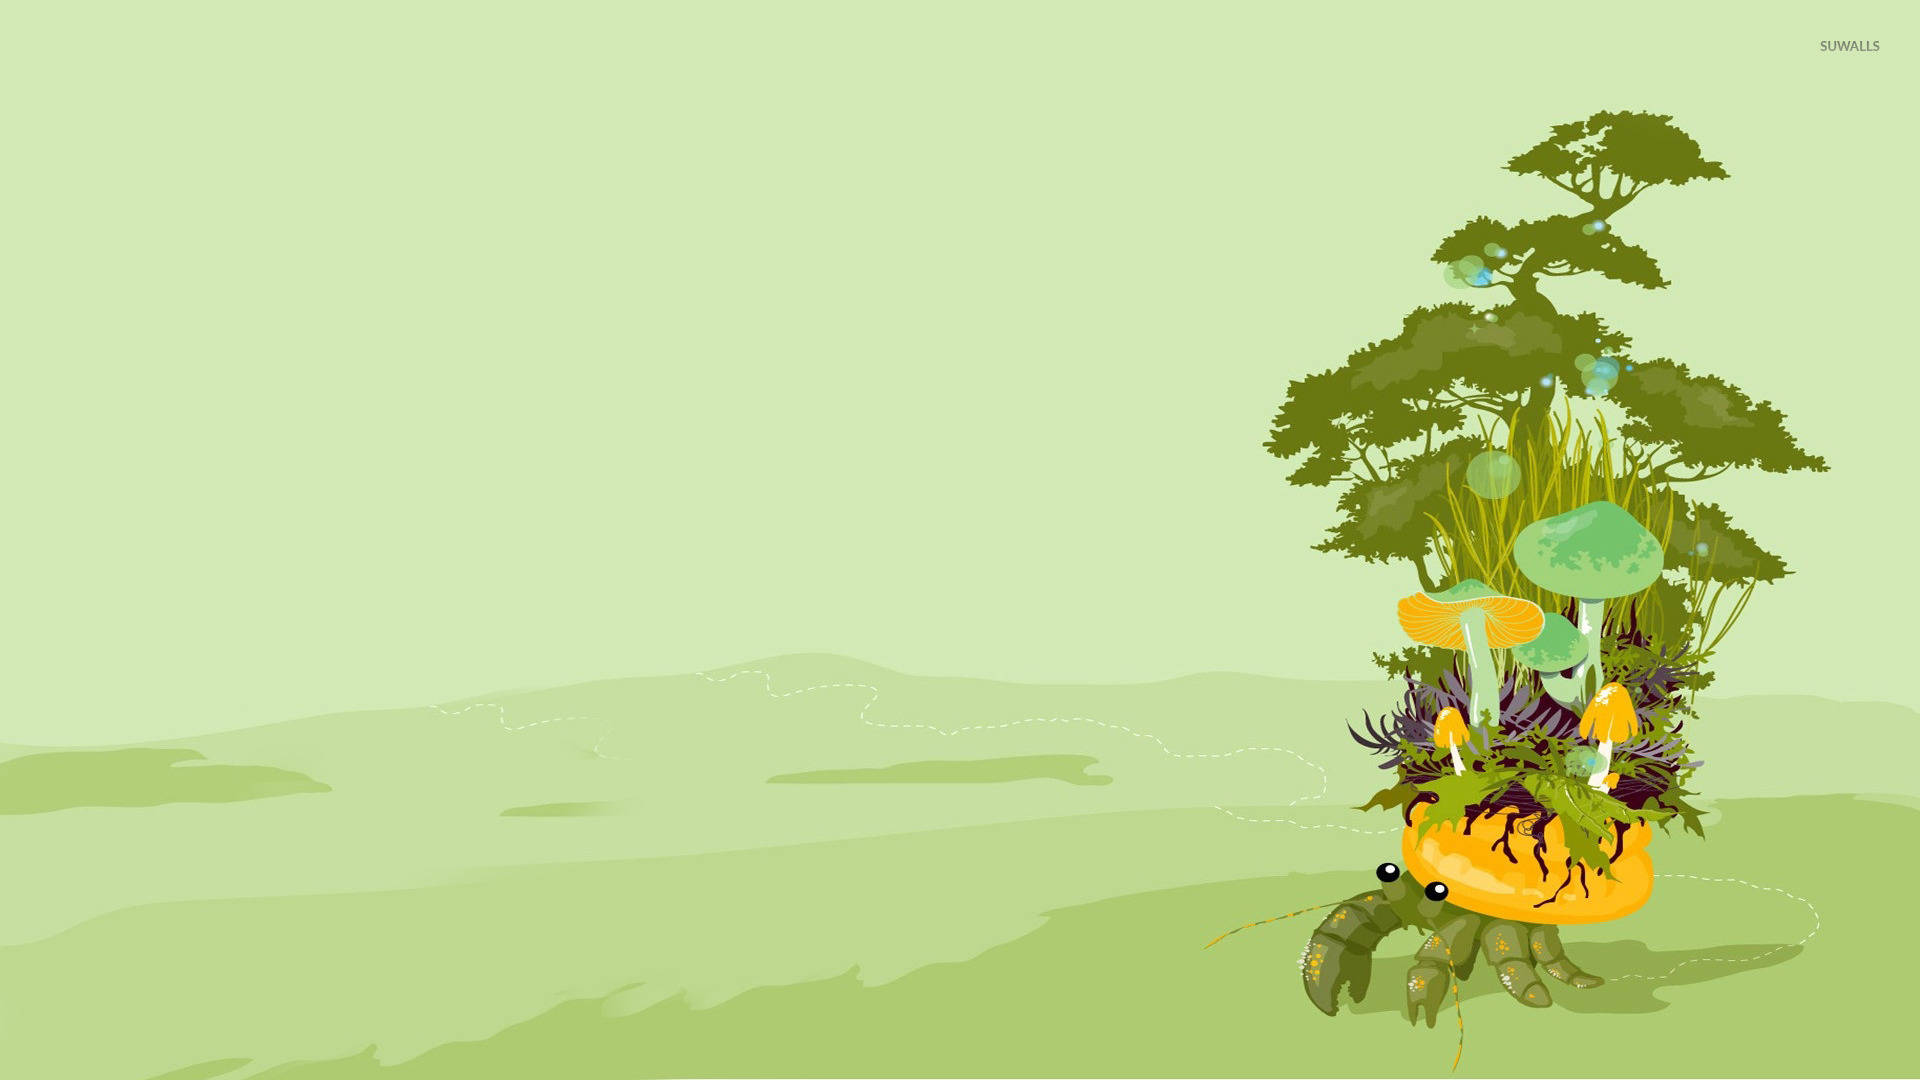 Animated Forest On Crab's Back Wallpaper